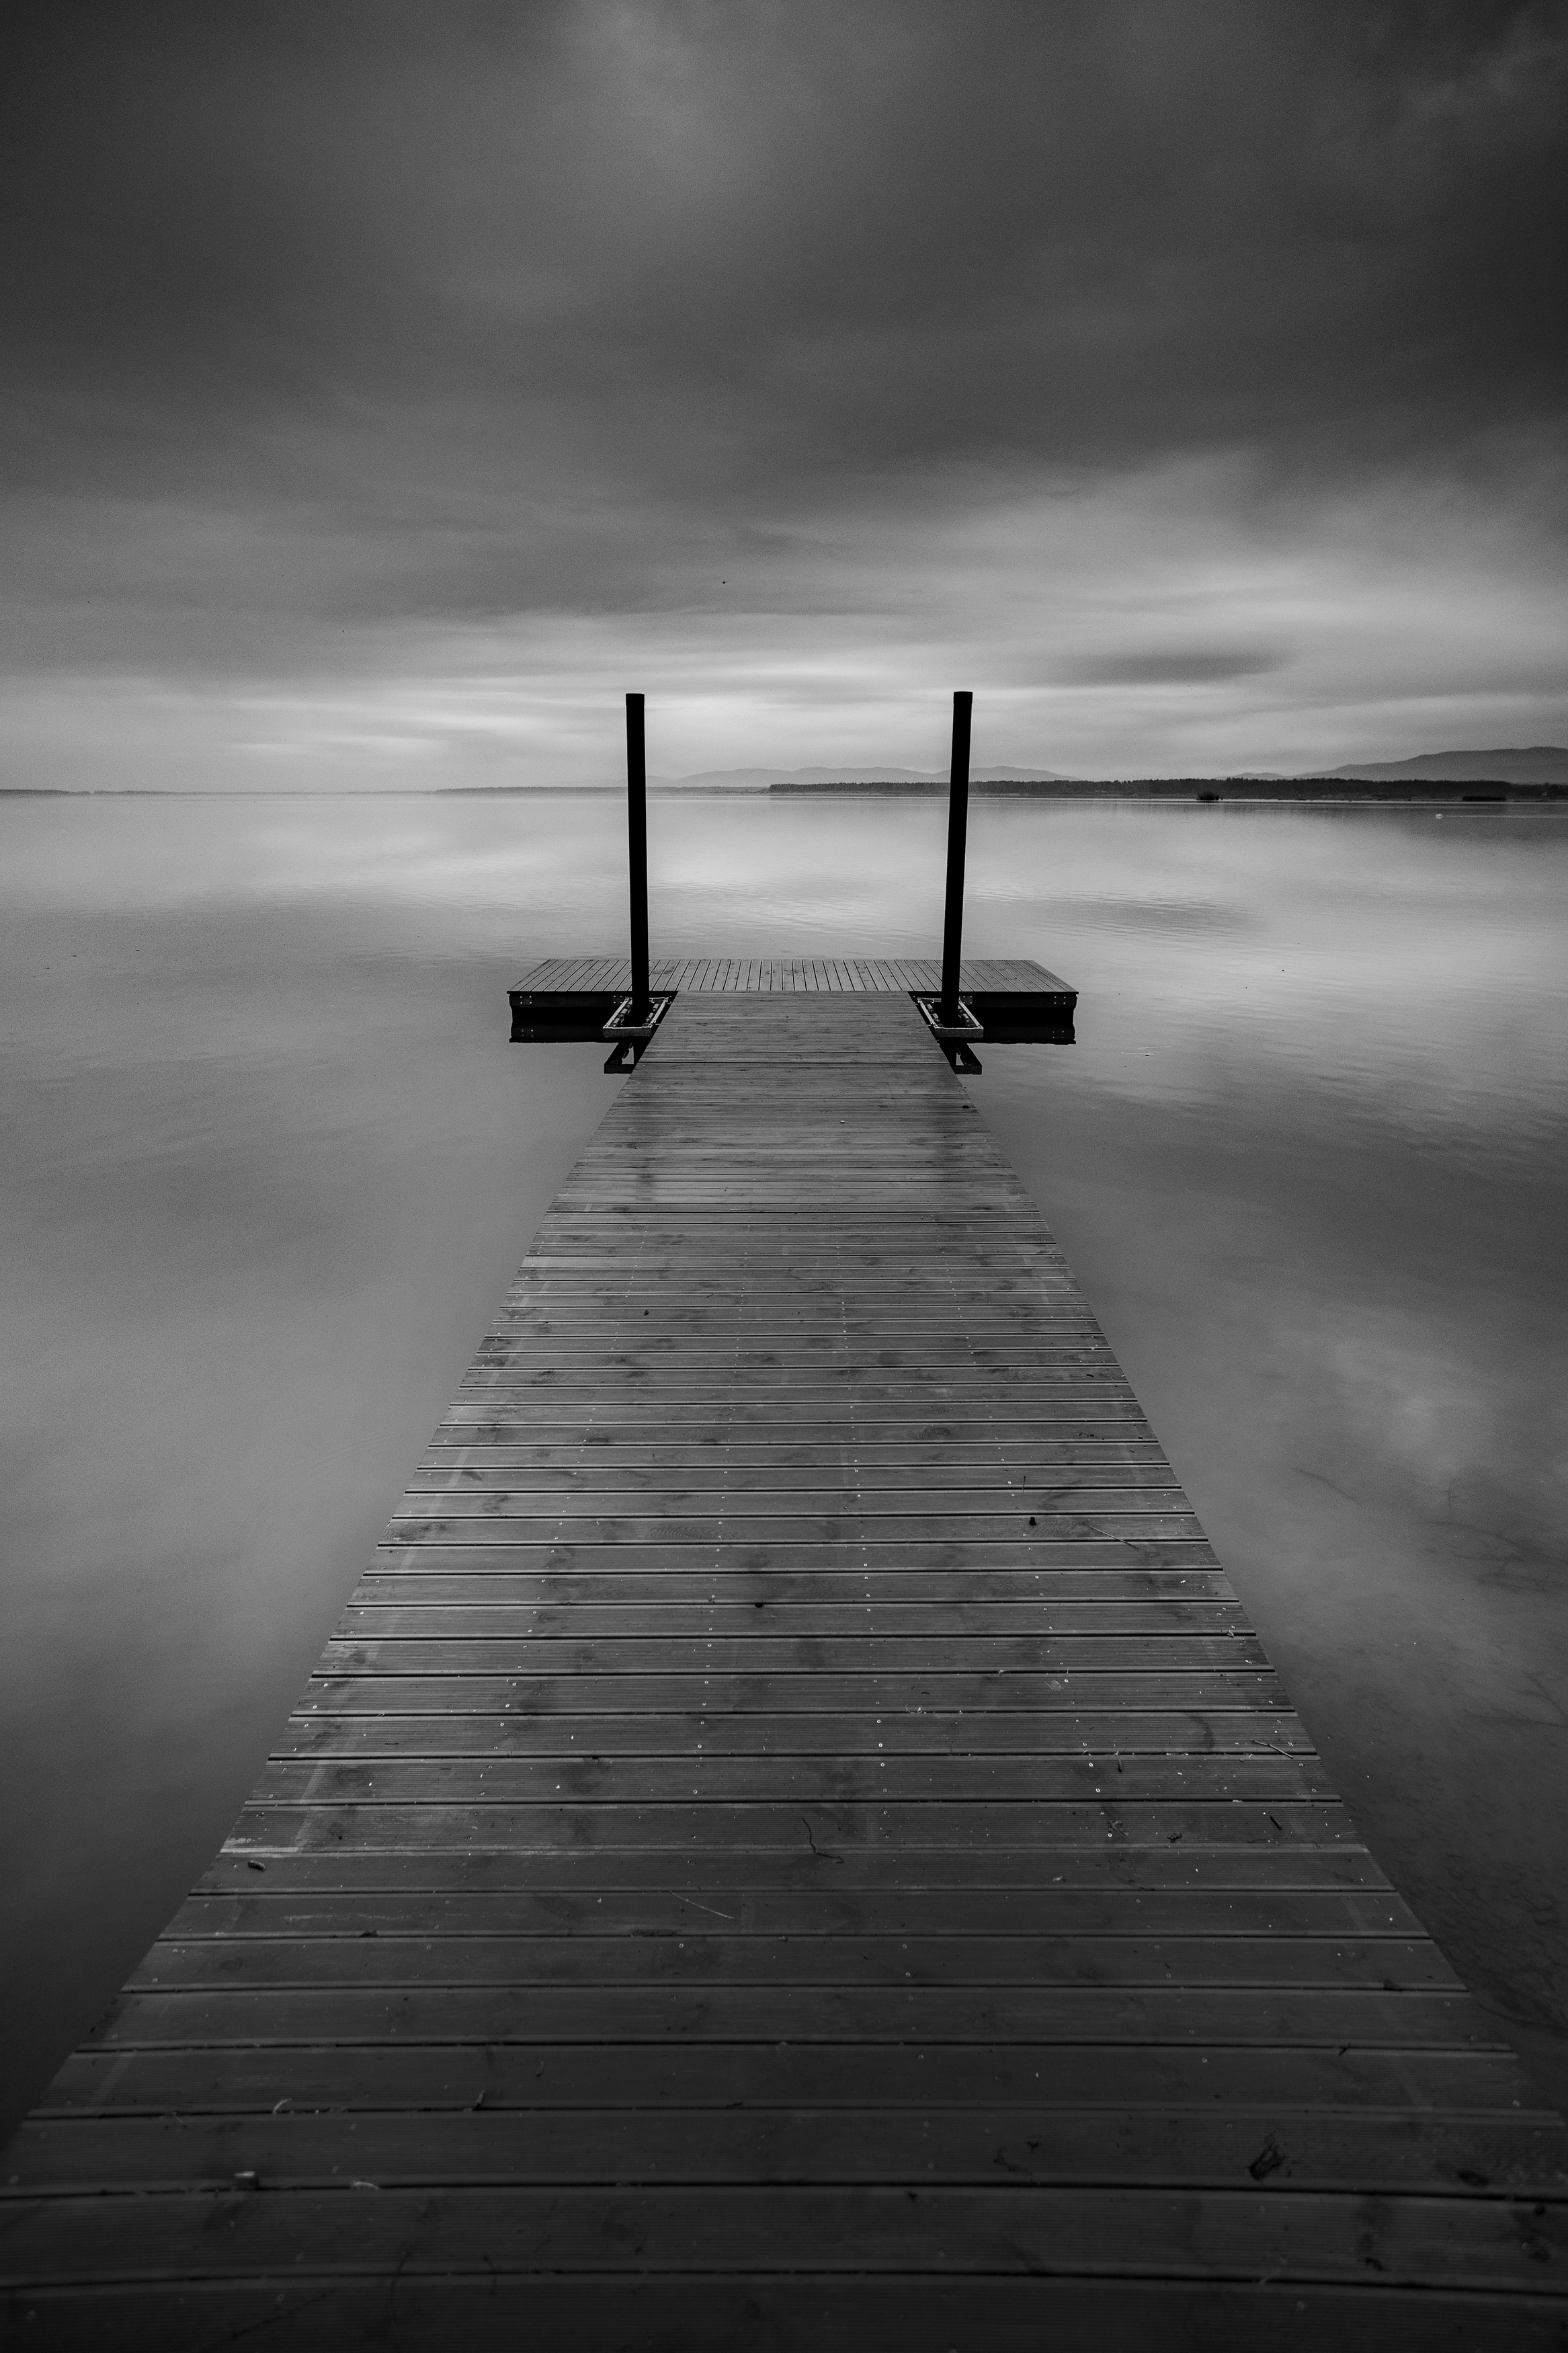 Vertical, Photography, Nature, Tranquility, Day, Nature, Water, Tranquil, Sky, Pier, Lake, Black&white, Monochrome, Damian Cyfka